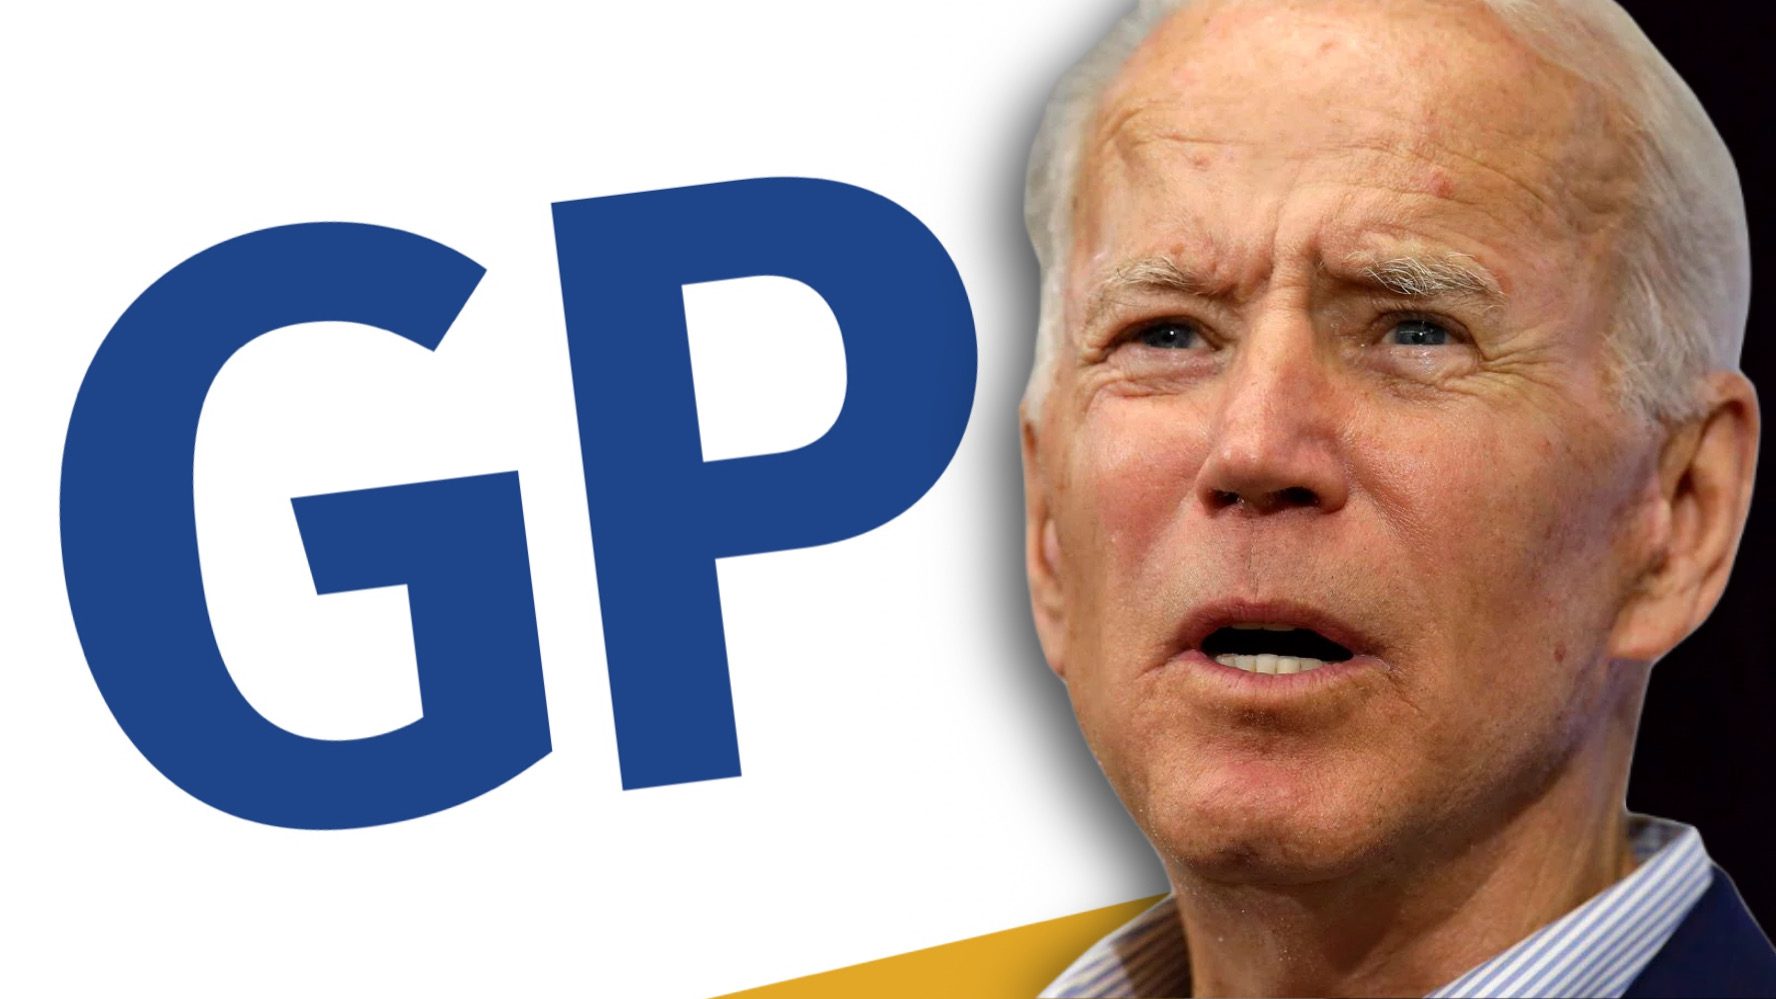 5th Circuit Court of Appeals Temporarily Pauses Court Order That Banned Biden Regime from Censoring Conservatives